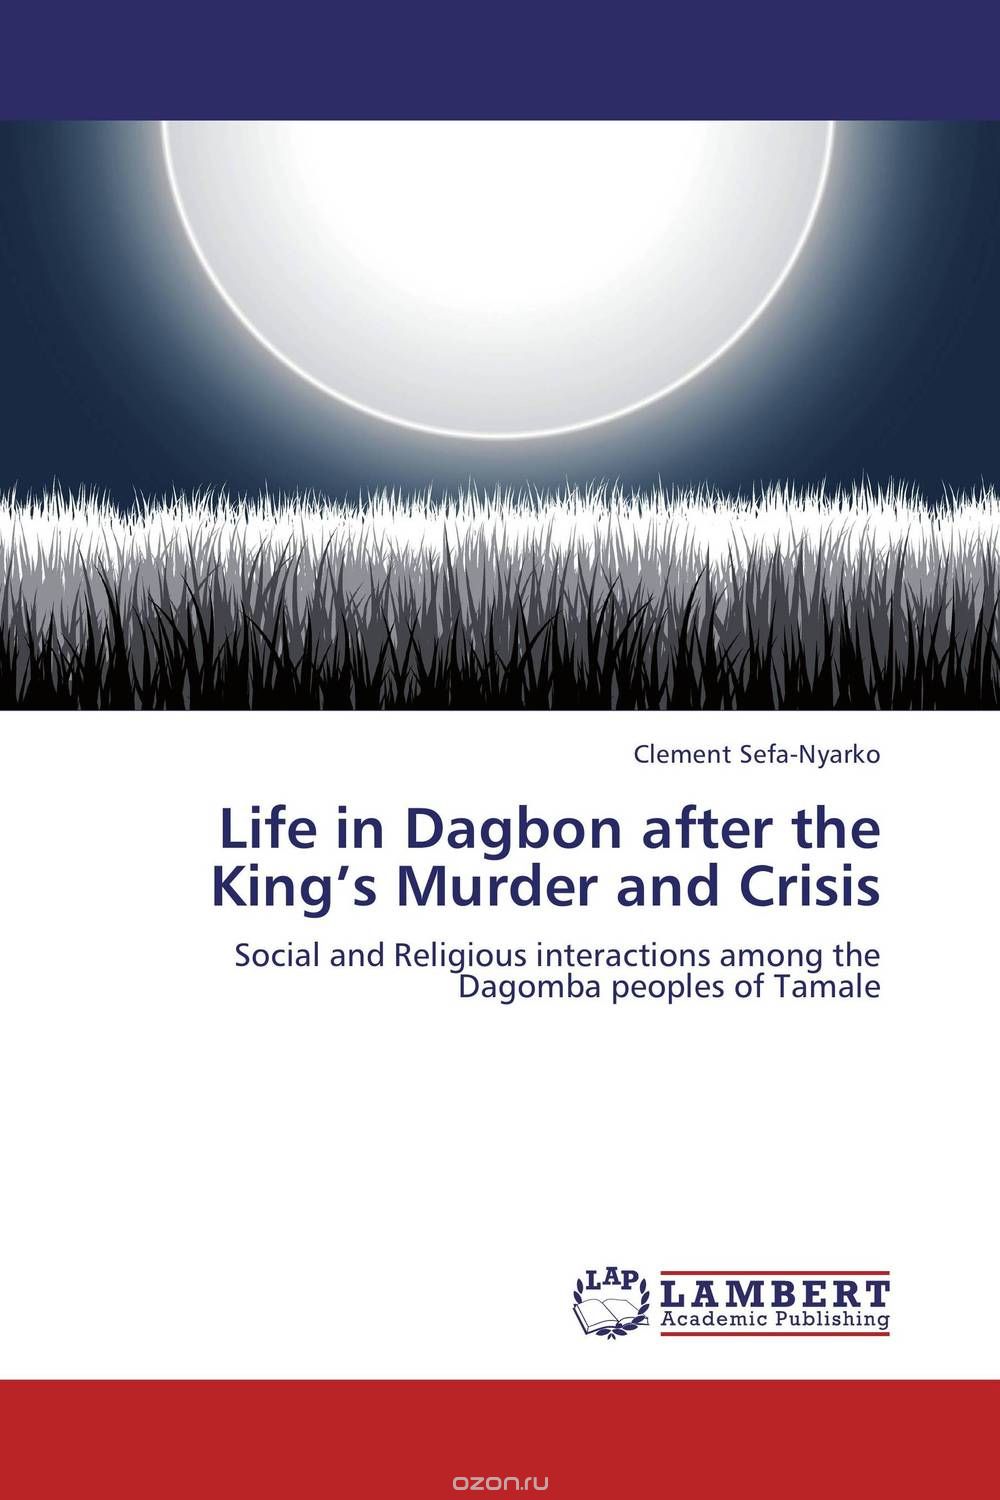 Скачать книгу "Life in Dagbon after the King’s Murder and Crisis"